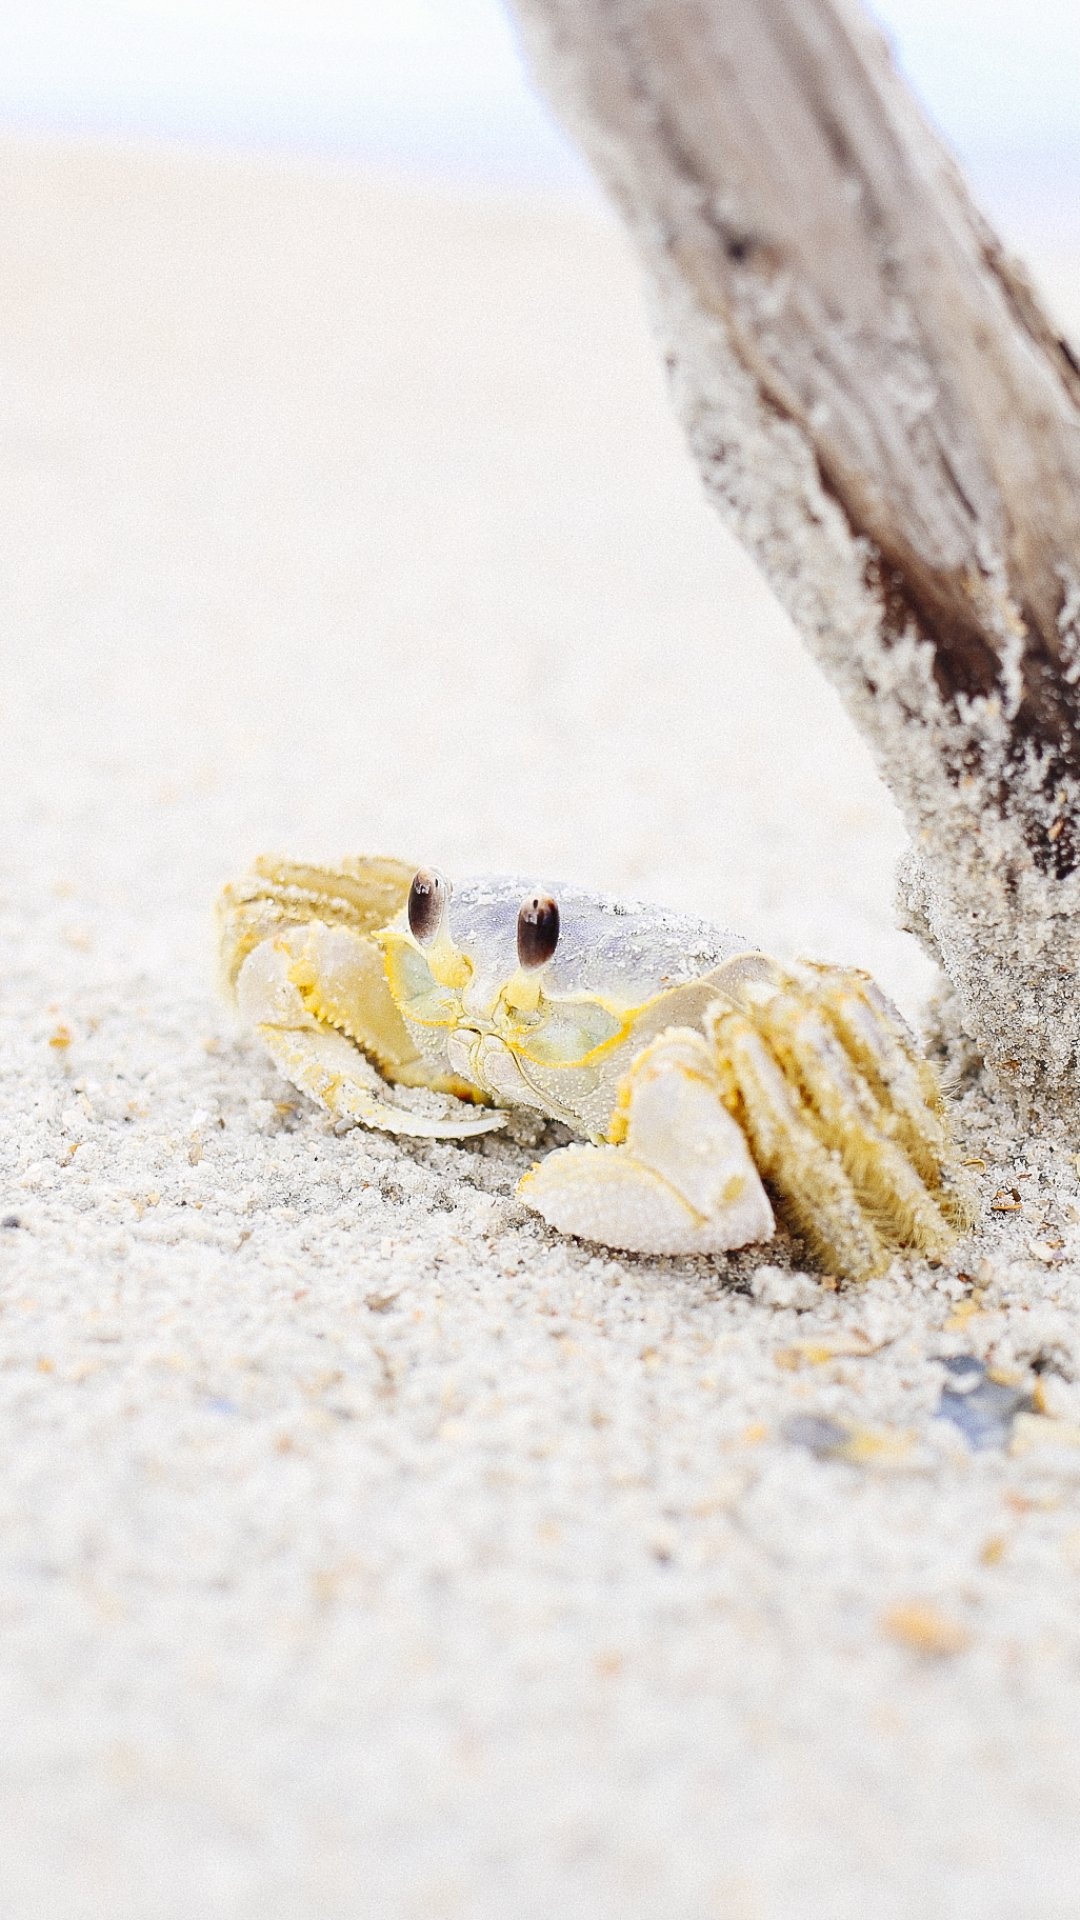 Crab: Animals, Are omnivorous and feed predominantly on algae. 1080x1920 Full HD Wallpaper.